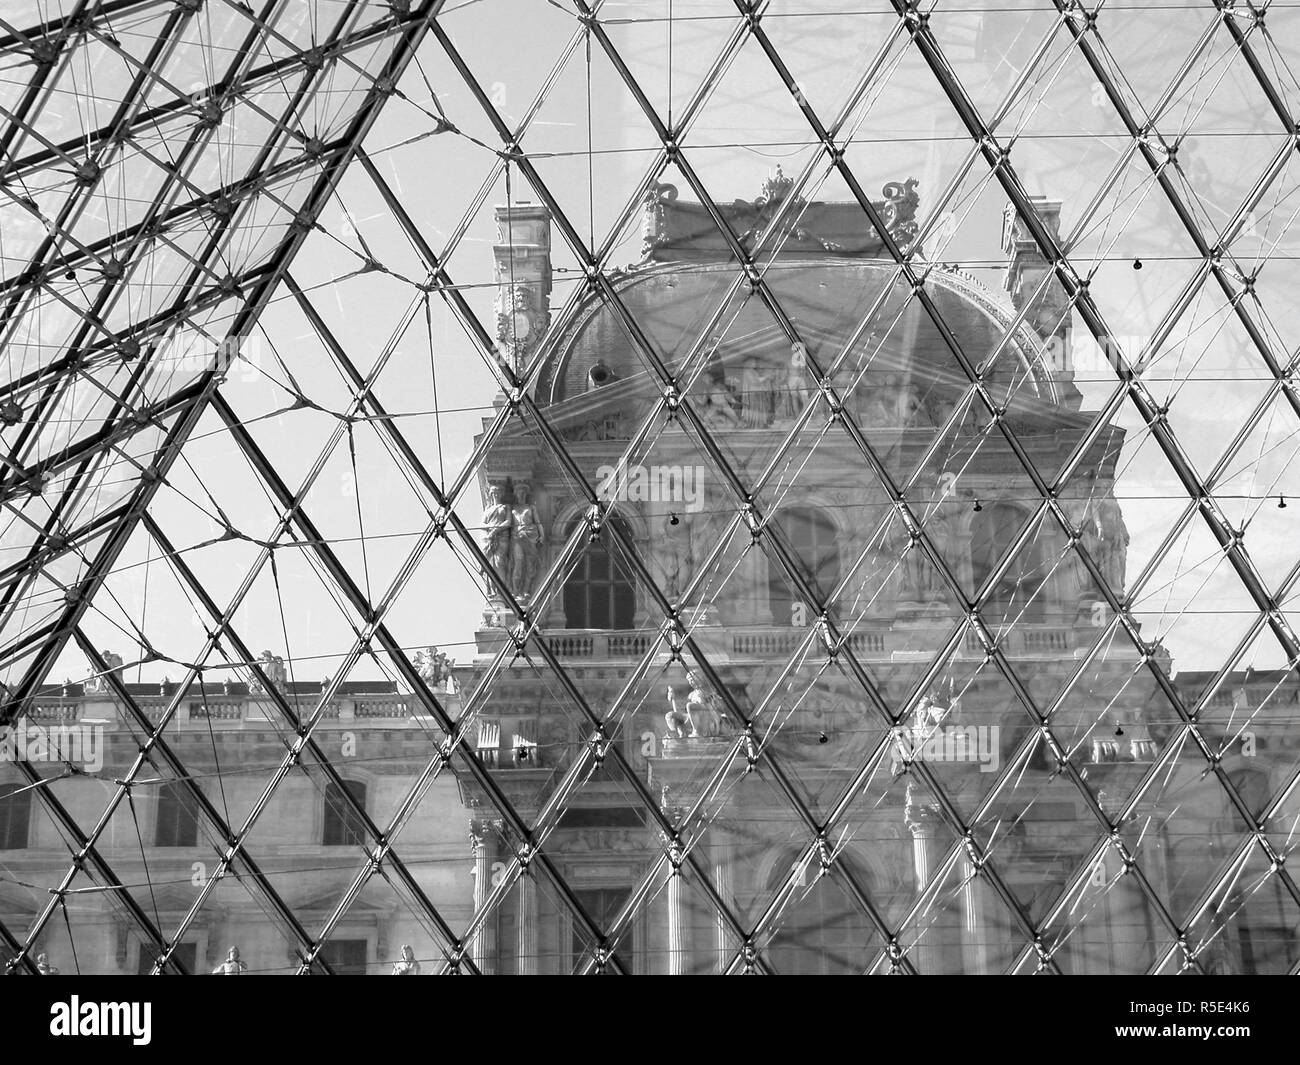 Pavillon Denon of the Palais du Louvre, Paris, France, seen from inside the Pyramid. Black and white version Stock Photo